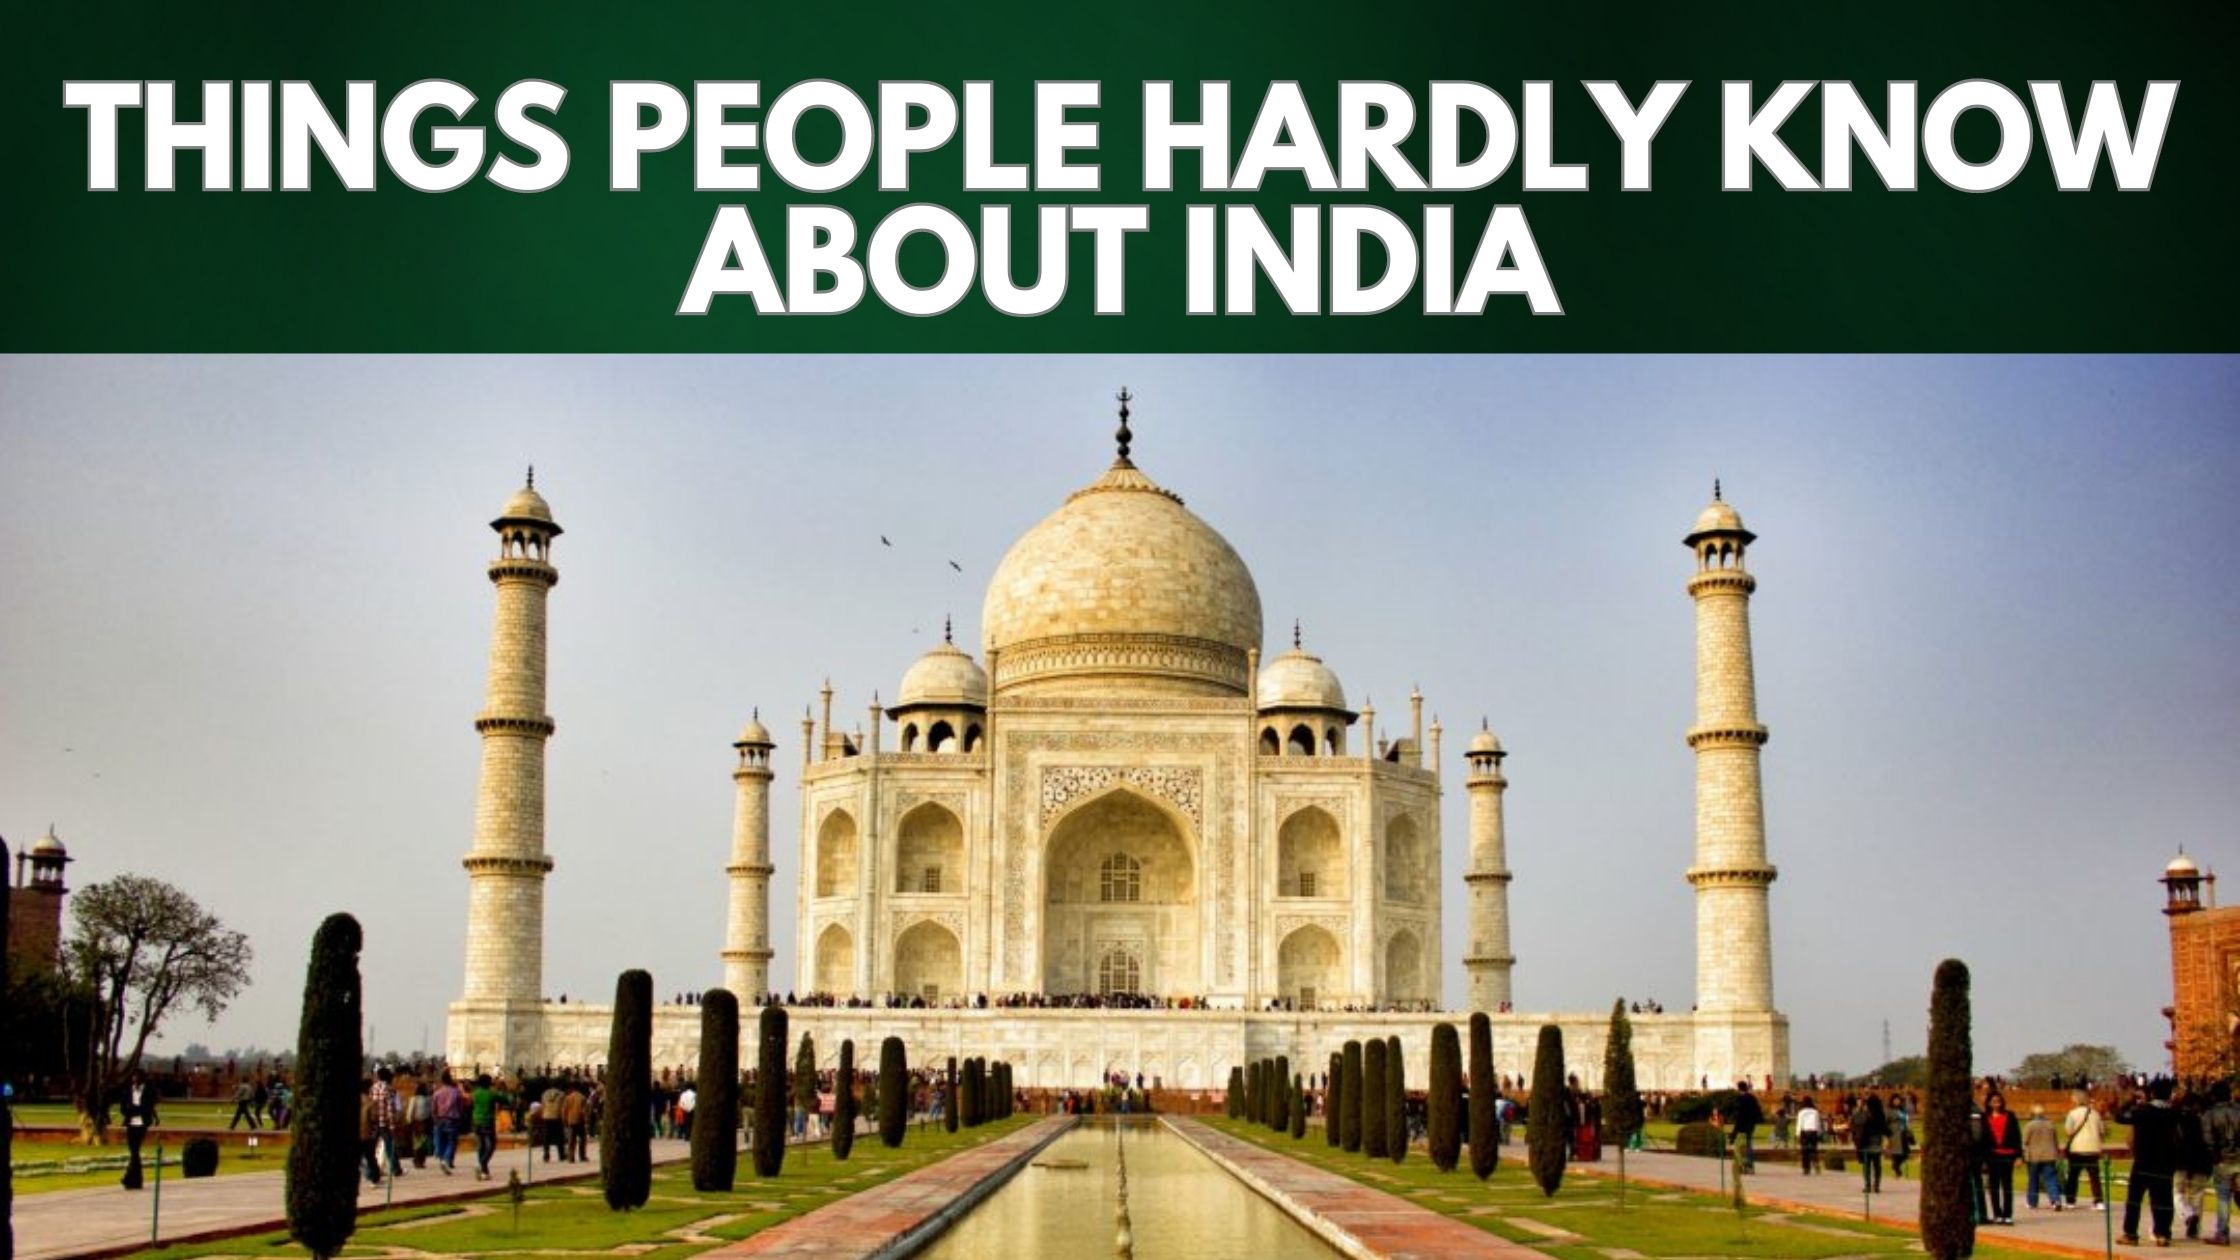 Things People Hardly Know About India